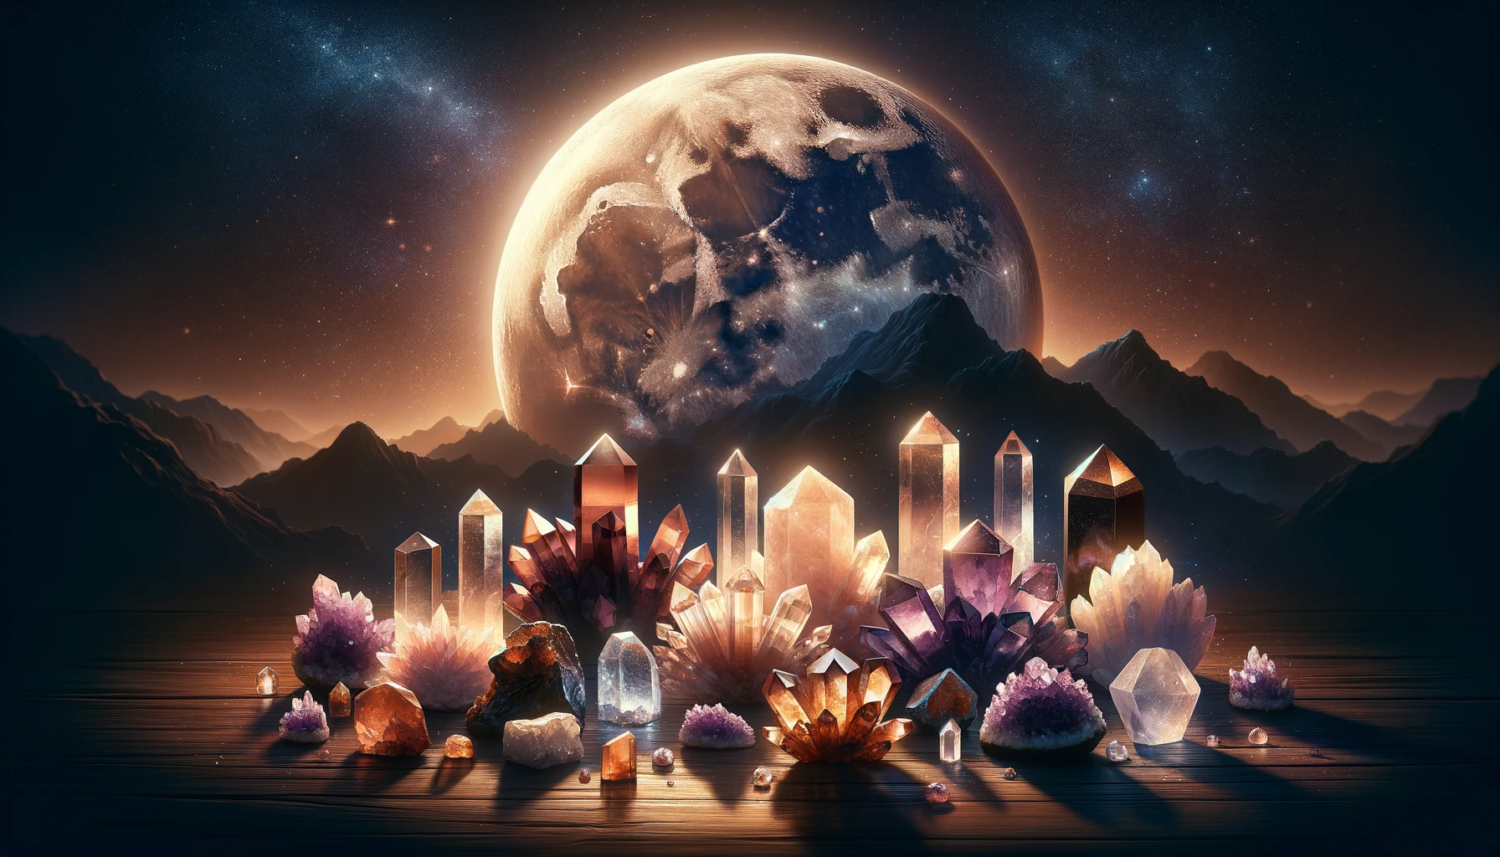 Craft a banner-sized image featuring various crystals charging in the moonlight, with an overall brownish hue. The scene should depict a serene night, with a large, luminous full moon casting a gentle glow over an array of crystals. These crystals, in shades of amethyst, quartz, and citrine, are carefully arranged on a natural surface, like a wooden table or a rock, under the moonlight. The moon's light highlights the unique facets and colors of each crystal, creating a magical and mystical atmosphere. The background should incorporate shades of deep brown, merging with the dark blue of the night sky, to give a sense of tranquility and connection with nature. This image should convey the feeling of a peaceful night where the energy of the moon is enhancing the natural power of the crystals.